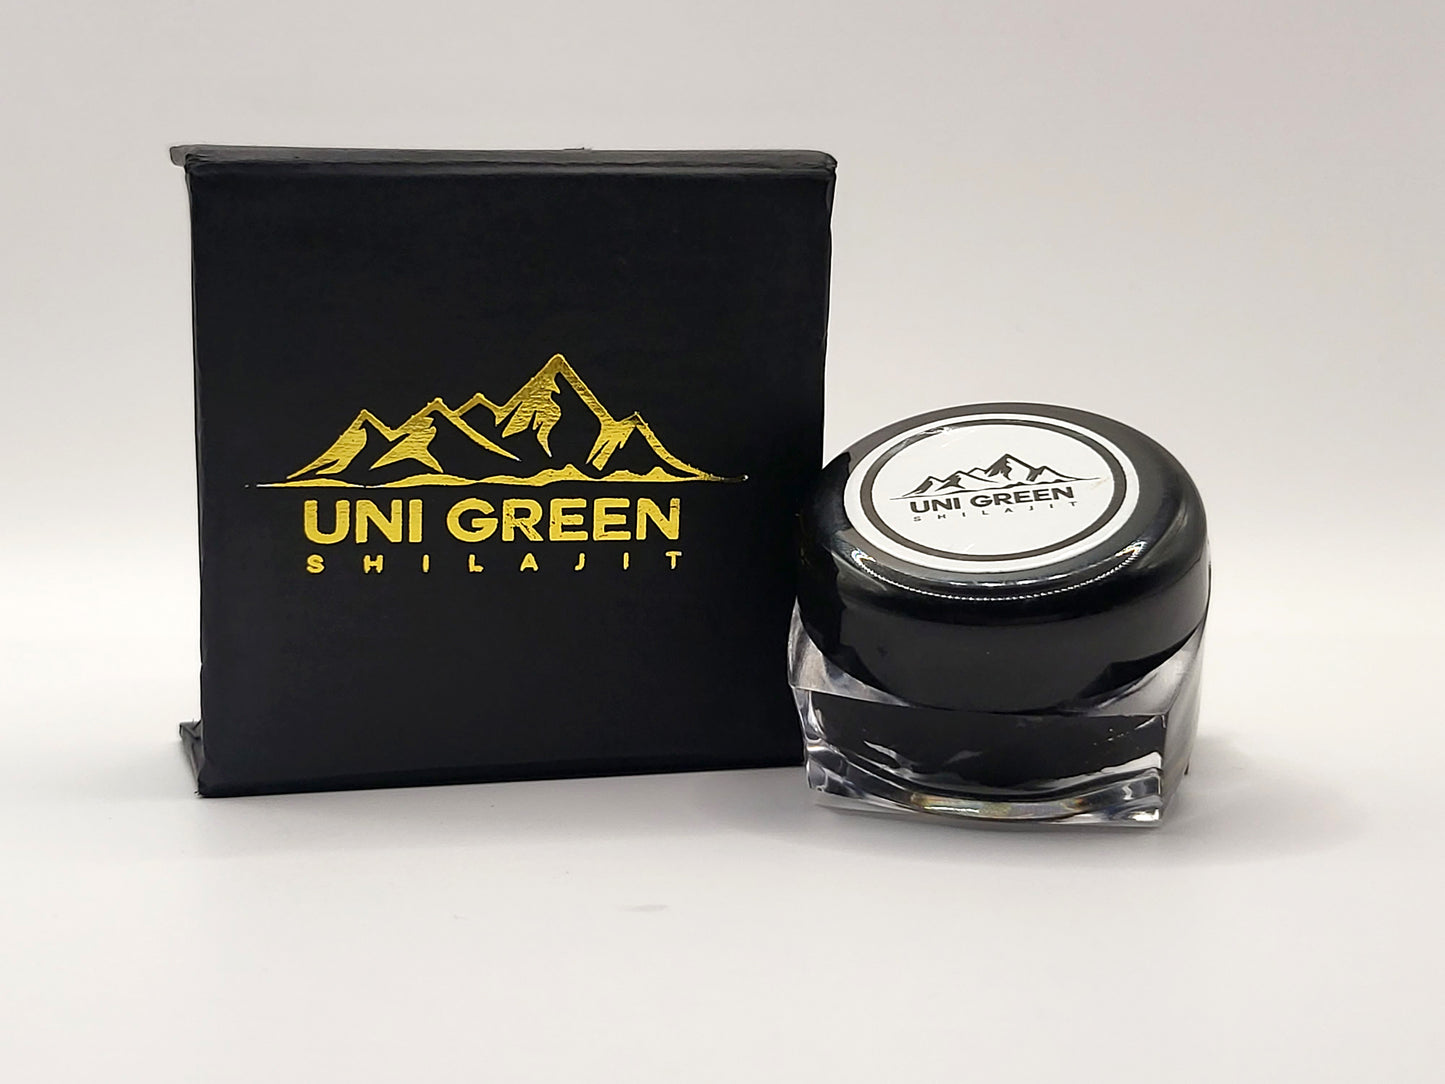 Unigreen Shilajit invites you to embrace a lifestyle of vitality and balance, crafted from the rich source of the Himalayan mountain range.